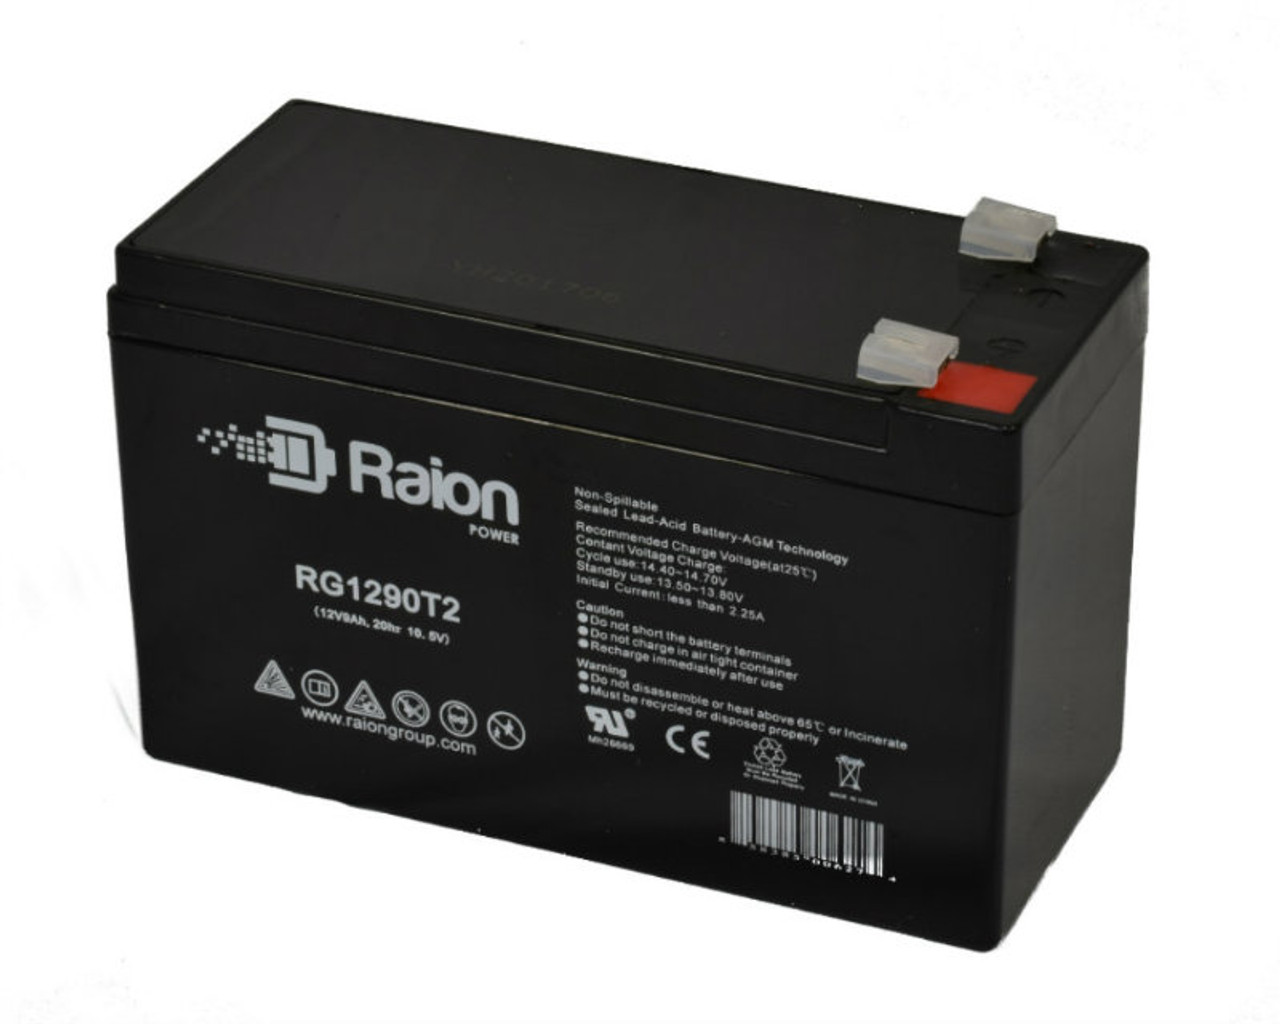 Raion Power RG1290T2 12V 9Ah AGM Battery for Enersys NP9-12